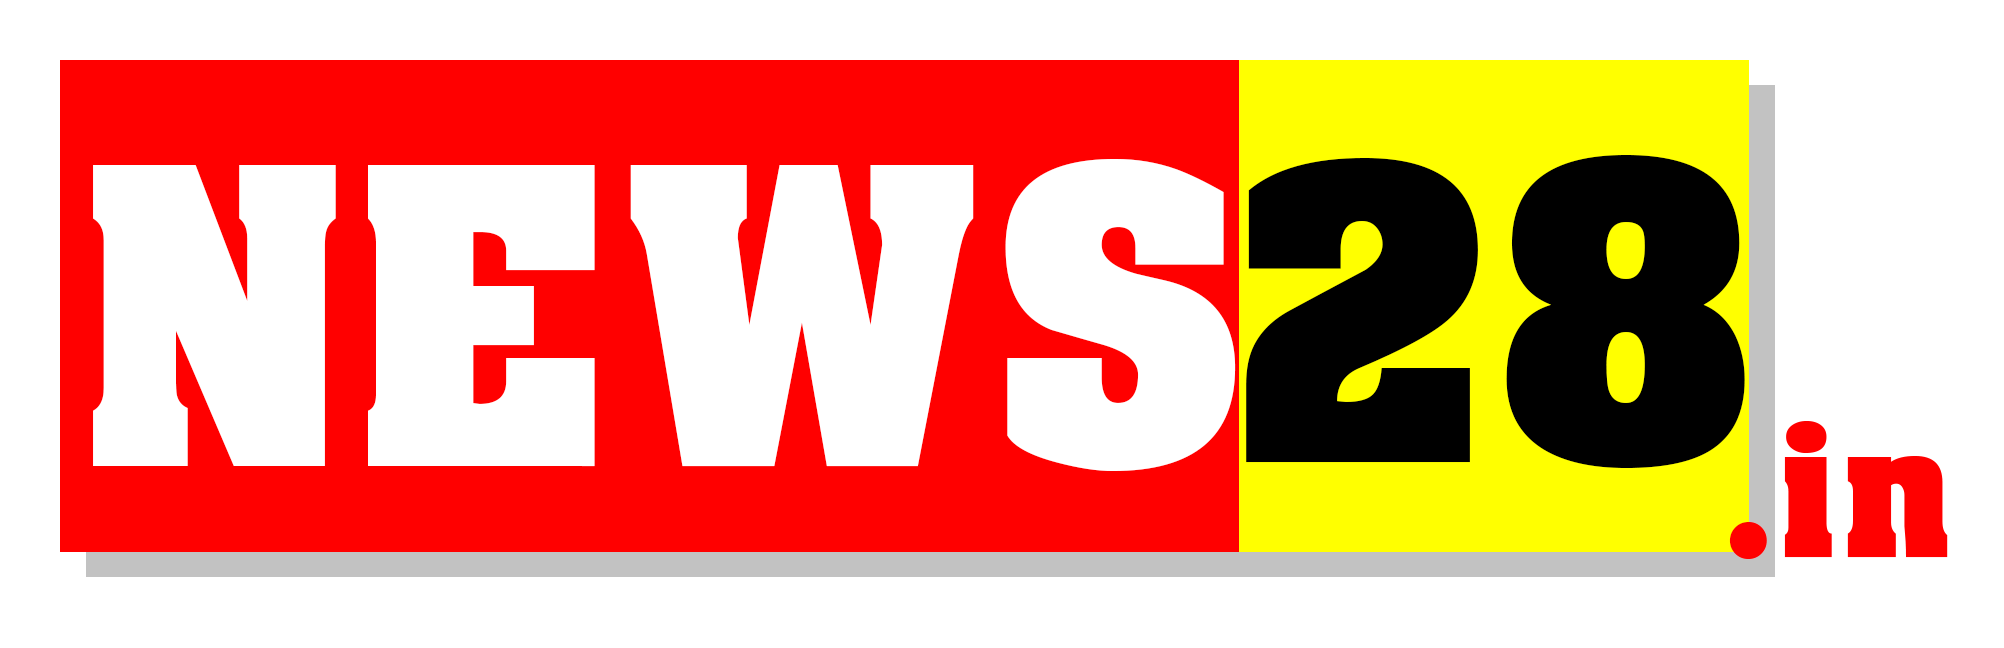 news28.in